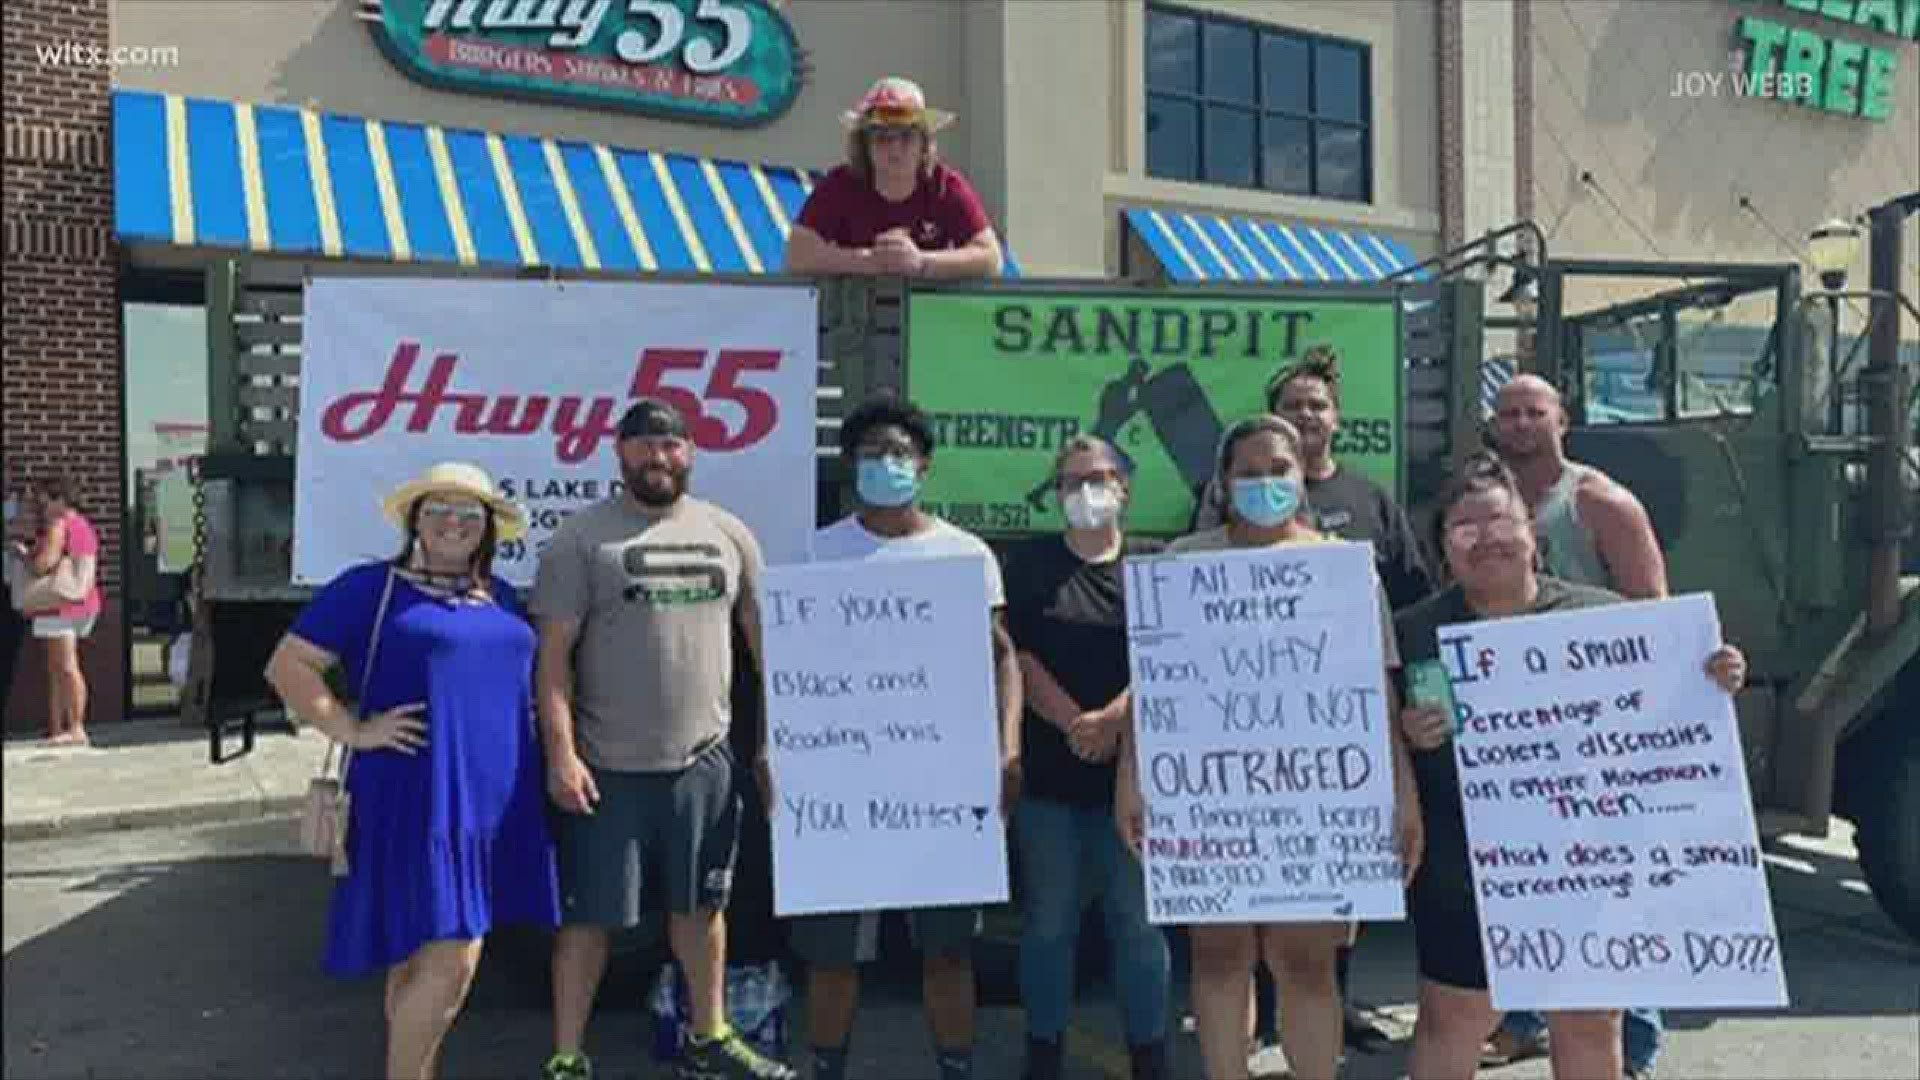 A small protest was held in Red Bank